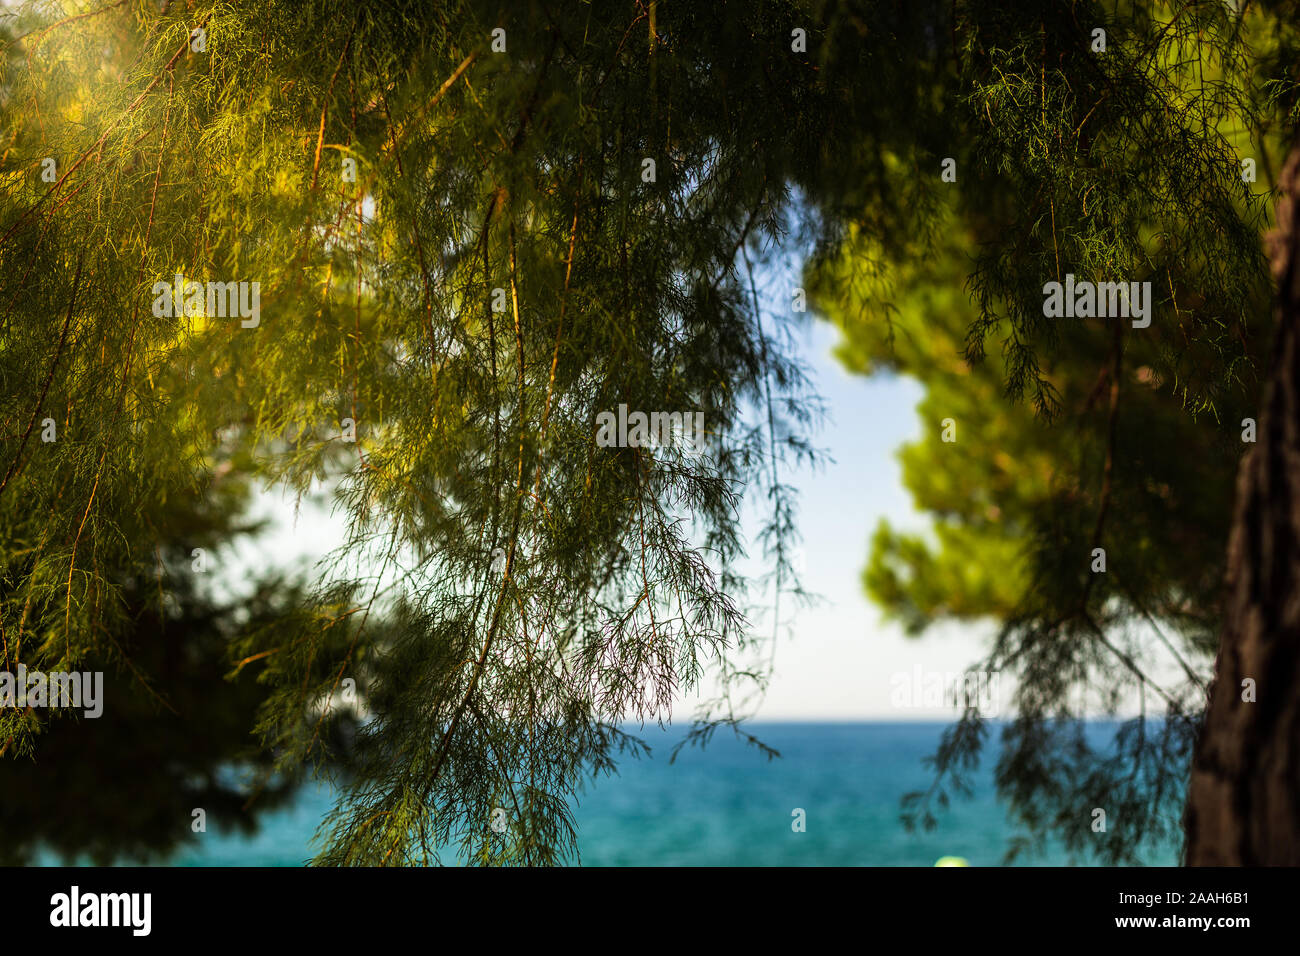 Sun Rays shining through a tree at the coast of the Mediterranean sea at the promenade near the miramare castle in Trieste, Italy. Stock Photo